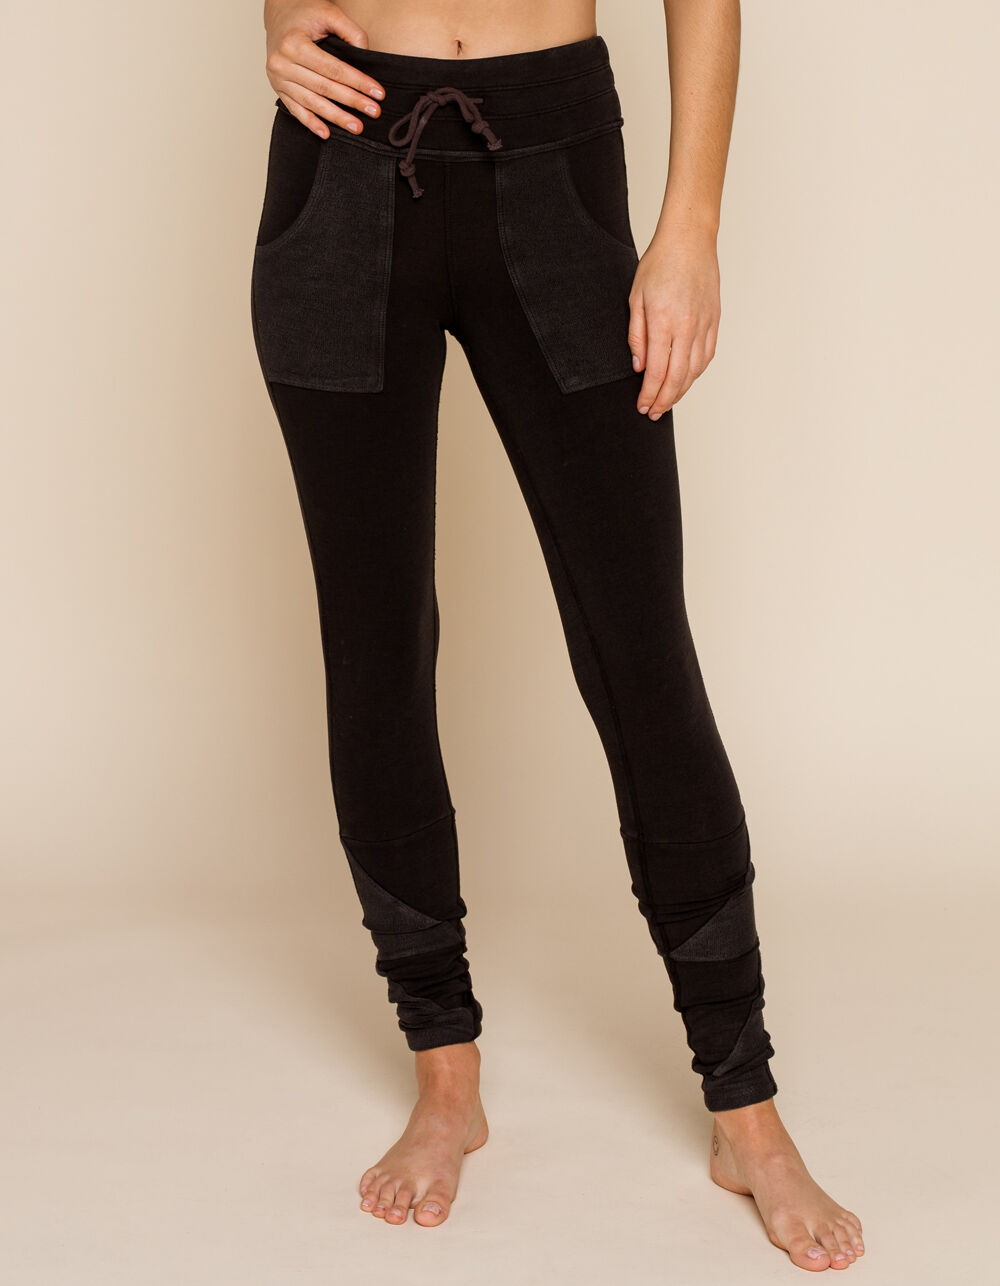 Free People Movement Kyoto leggings in washed black